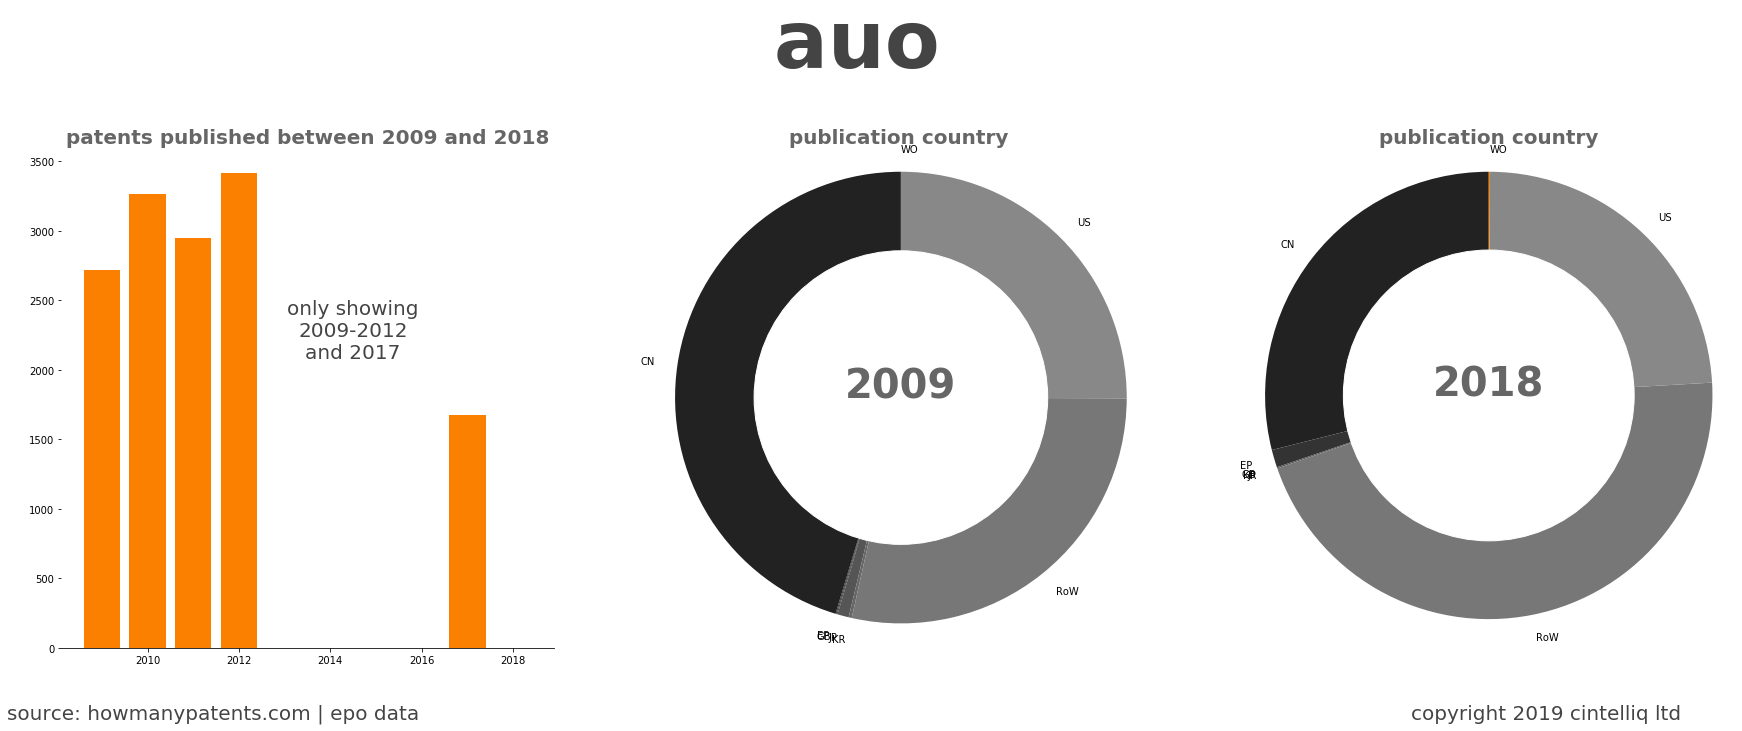 summary of patents for Auo 